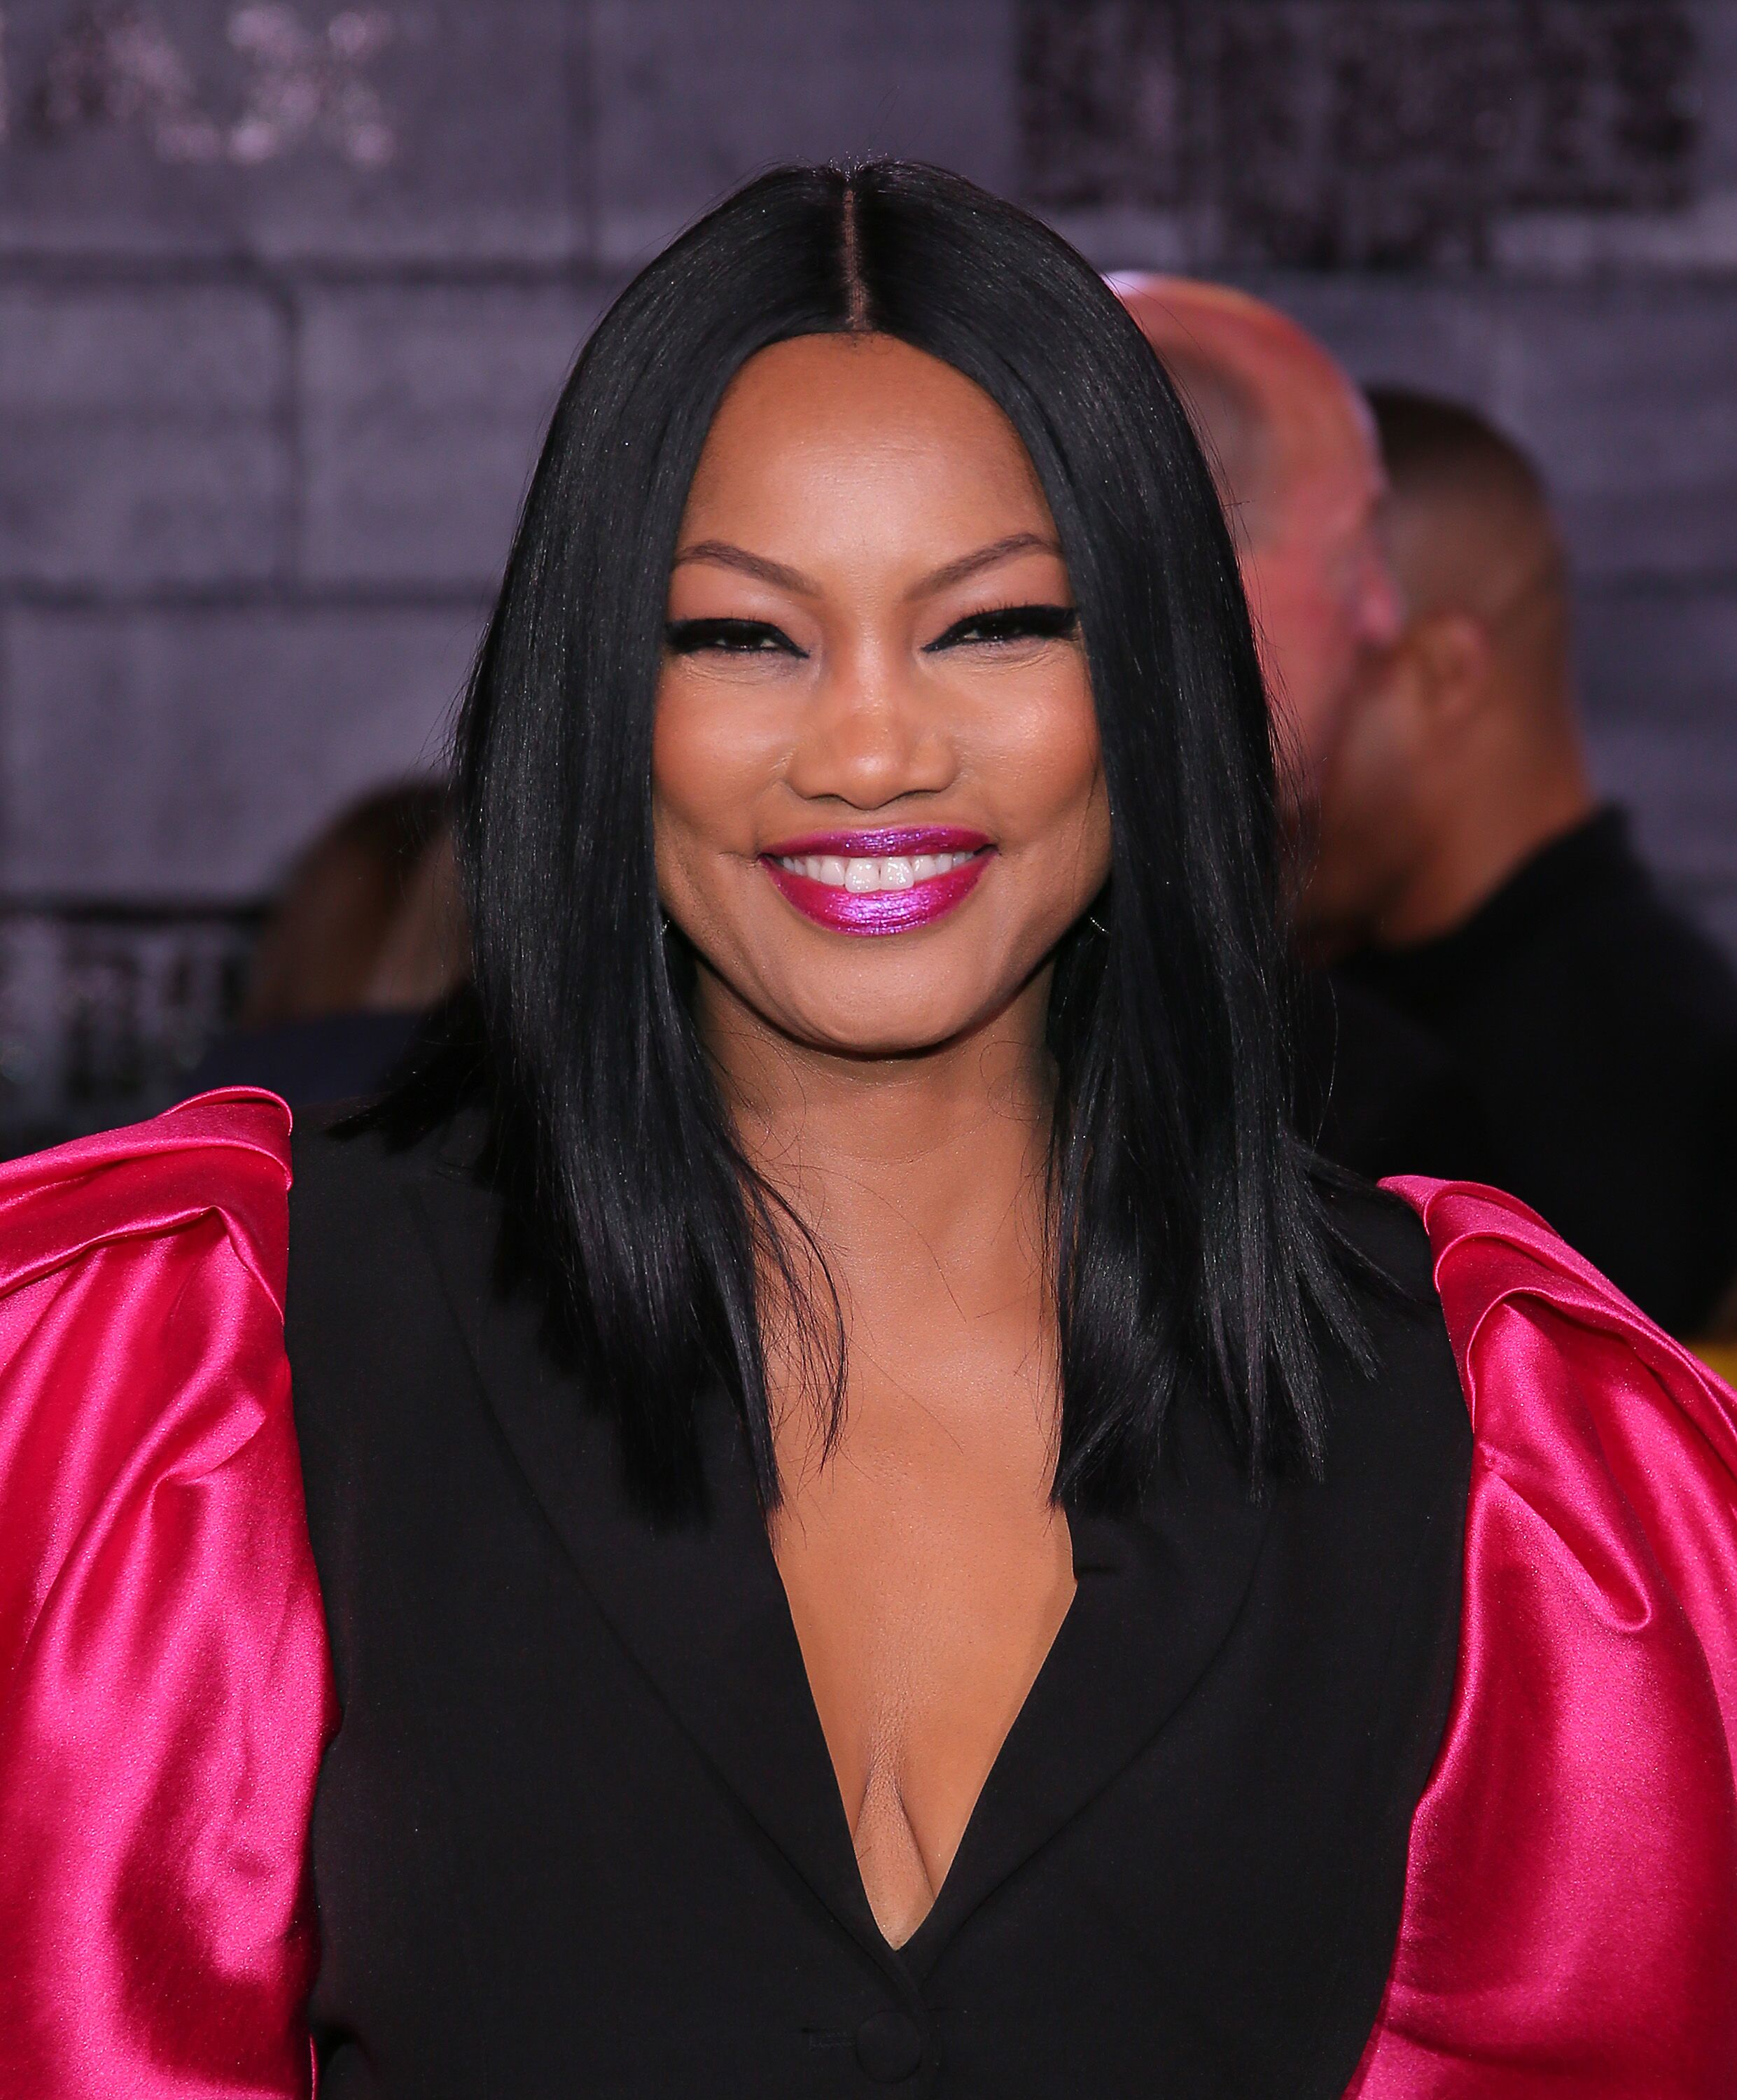 Garcelle Beauvais attends the World Premiere of "Bad Boys for Life" at TCL Chinese Theatre on January 14, 2020 | Photo: Getty Images